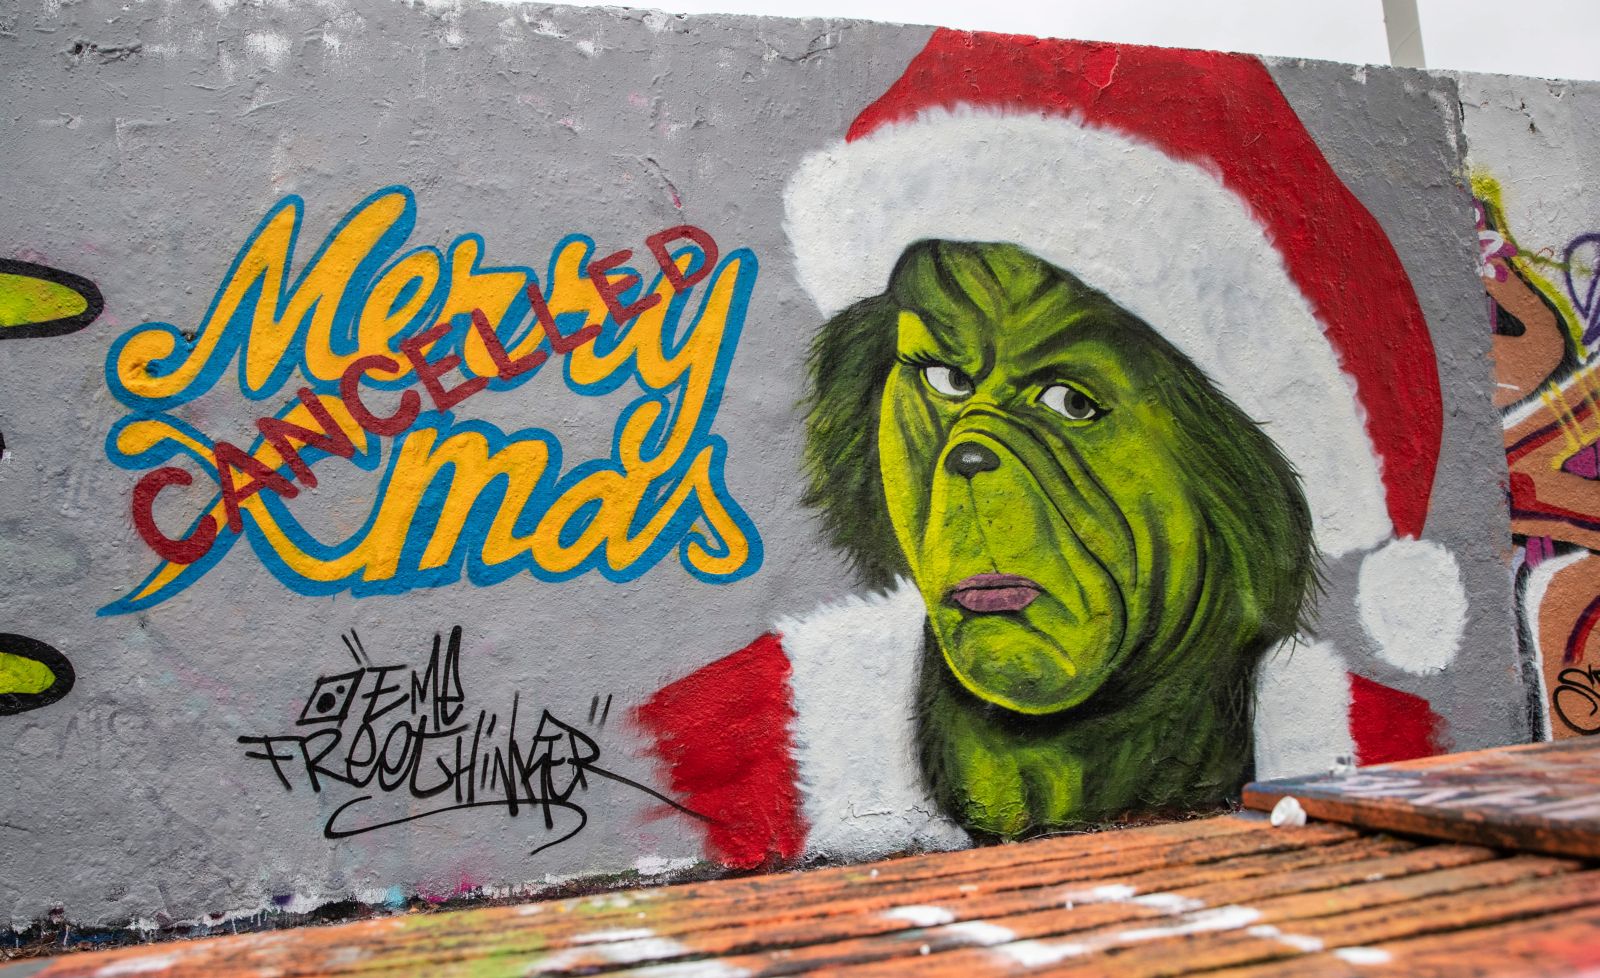 epa08899272 A mural reading 'Merry Xmas cancelled' is on display at the Mauerpark, a former part of the Berlin Wall, in Berlin, Germany, 22 December 2020. As the number of cases of the COVID-19 disease caused by the SARS-CoV-2 coronavirus is still rising throughout Germany, the government has imposed a second hard lockdown with businesses closing from 16 December on until 10 January 2021.  EPA/HAYOUNG JEON